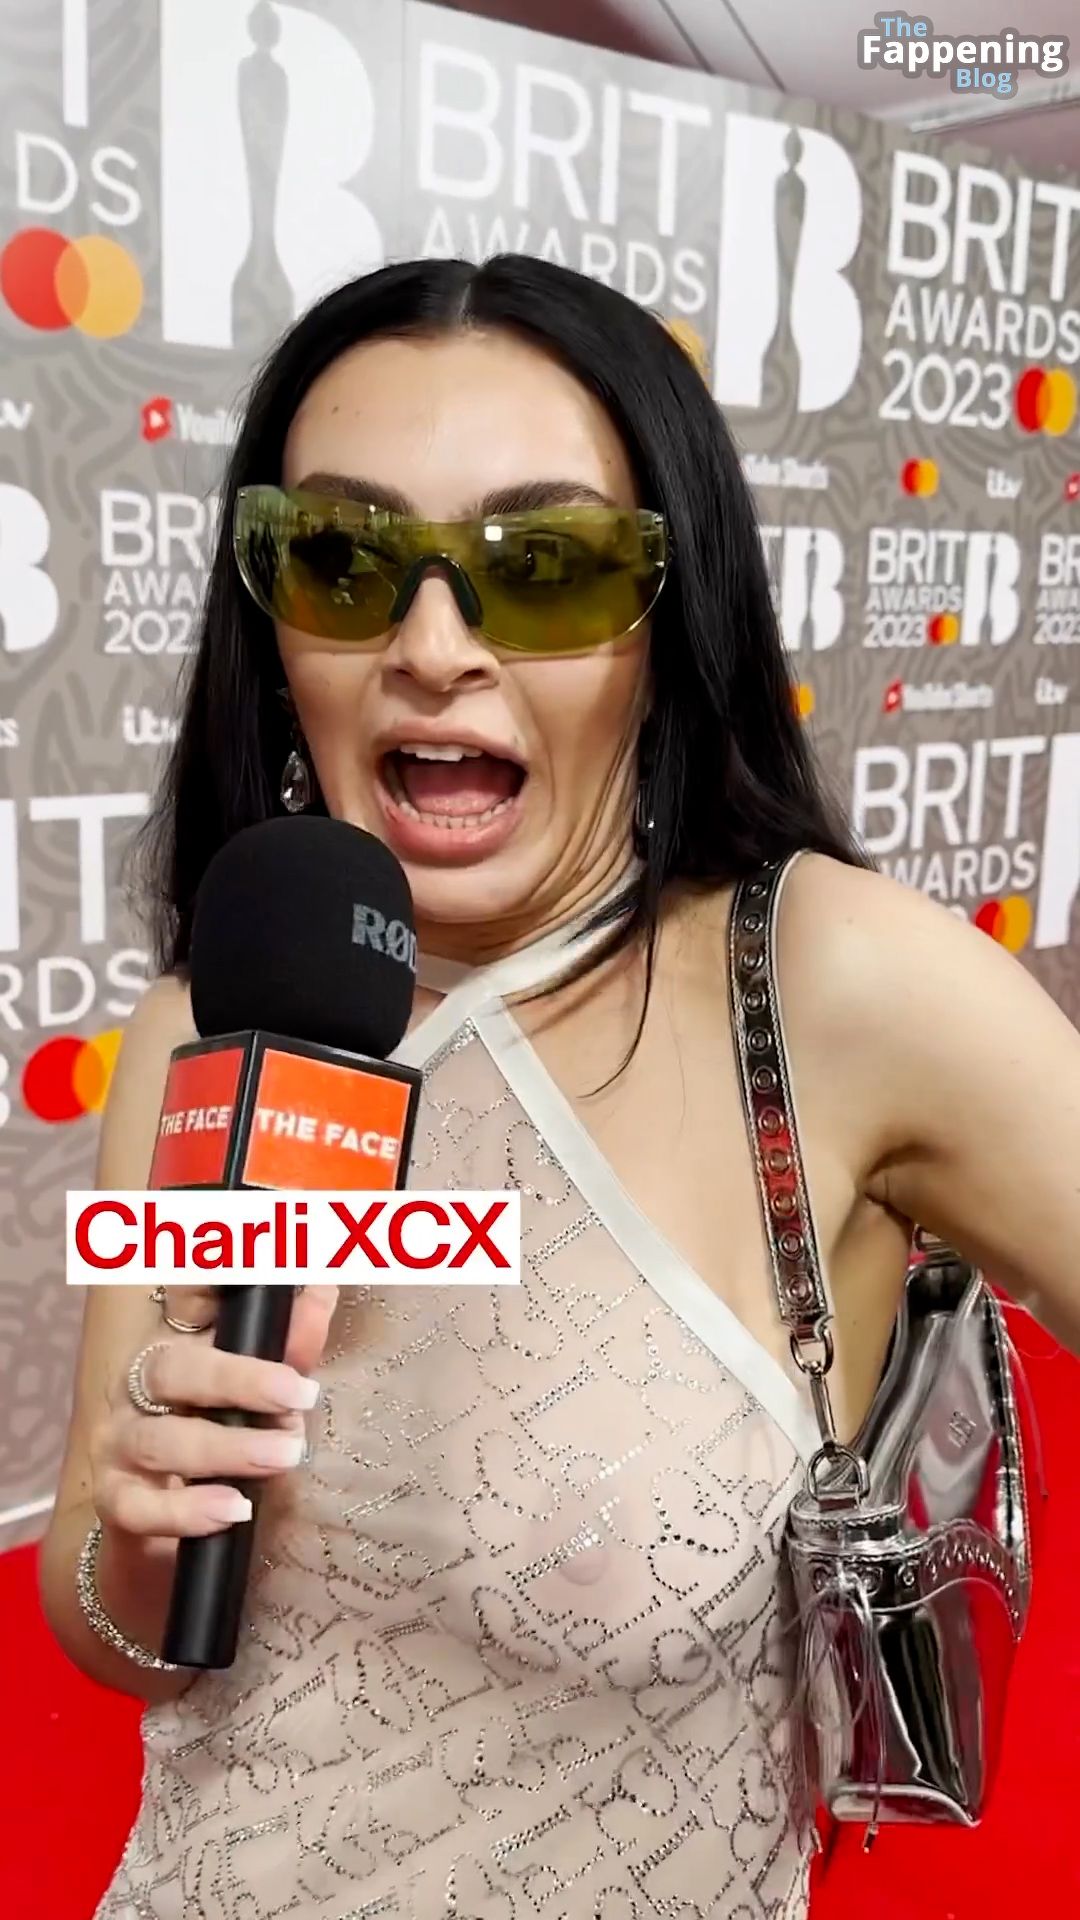 Charli-XCX-See-Through-Nudity-The-Fappening-Blog-6.jpg